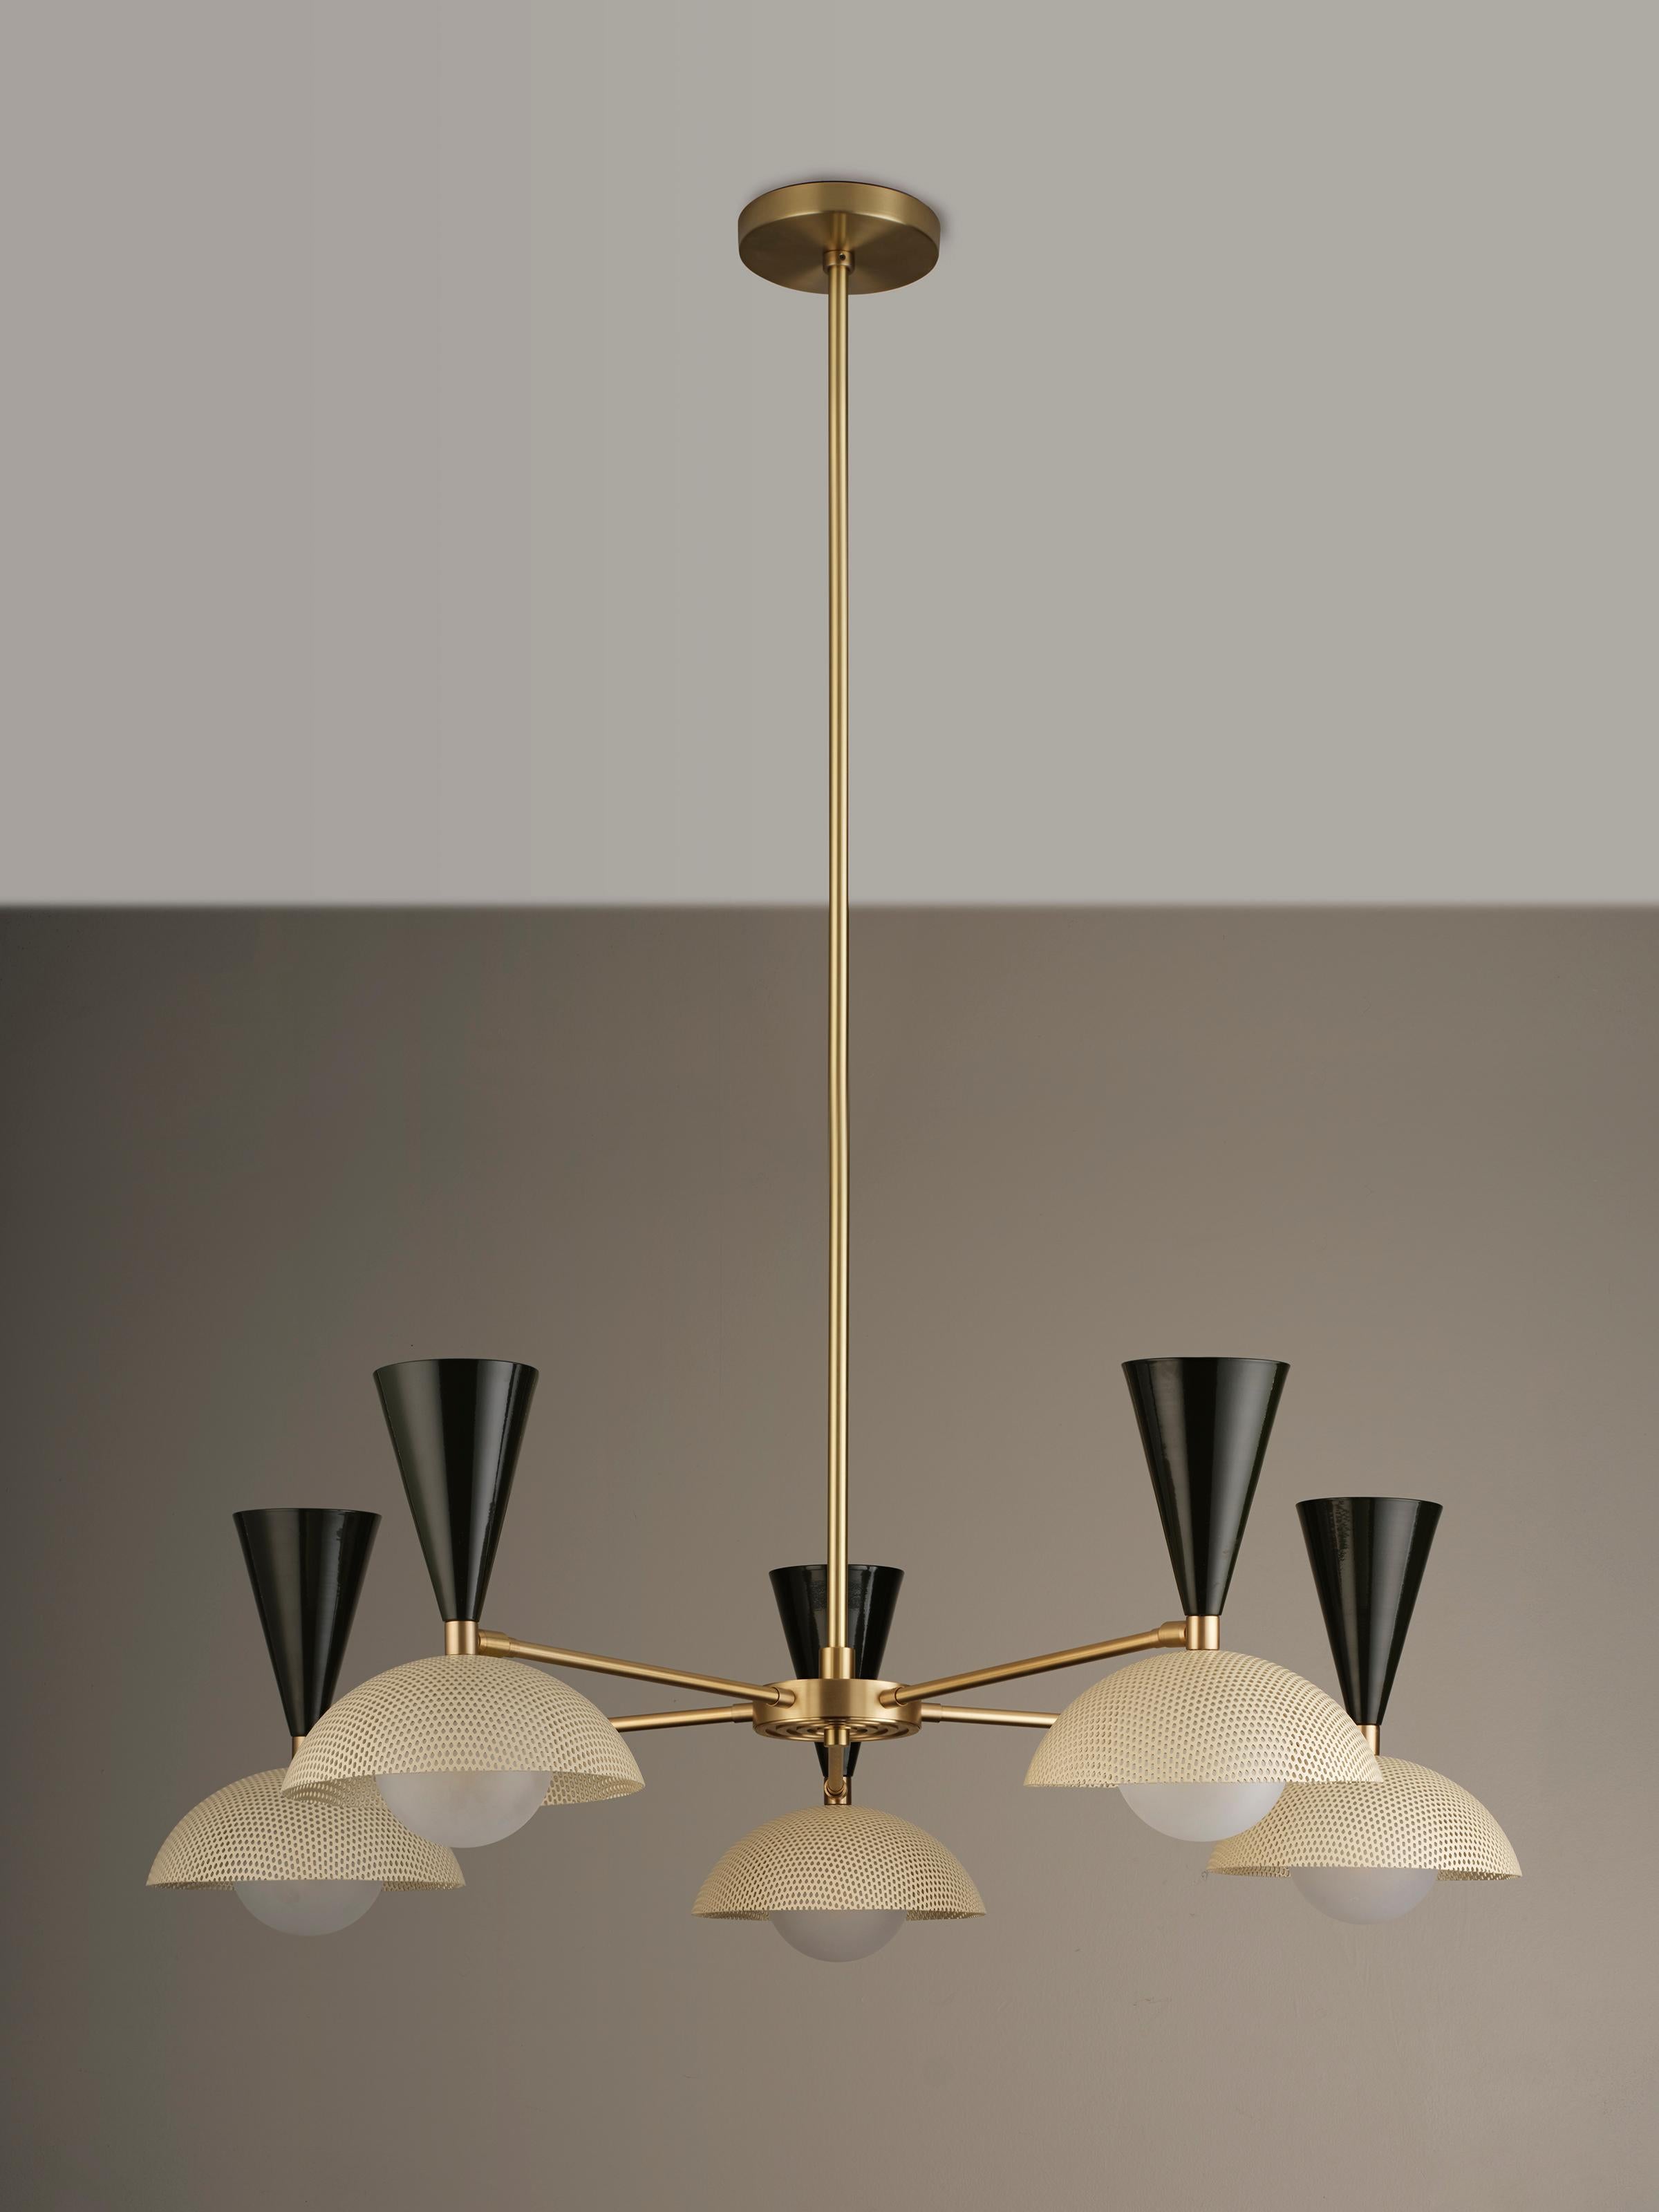 Molto 5-Arm Ceiling Fixture in Brushed Brass + Enameled Mesh, Blueprint Lighting In New Condition For Sale In New York, NY